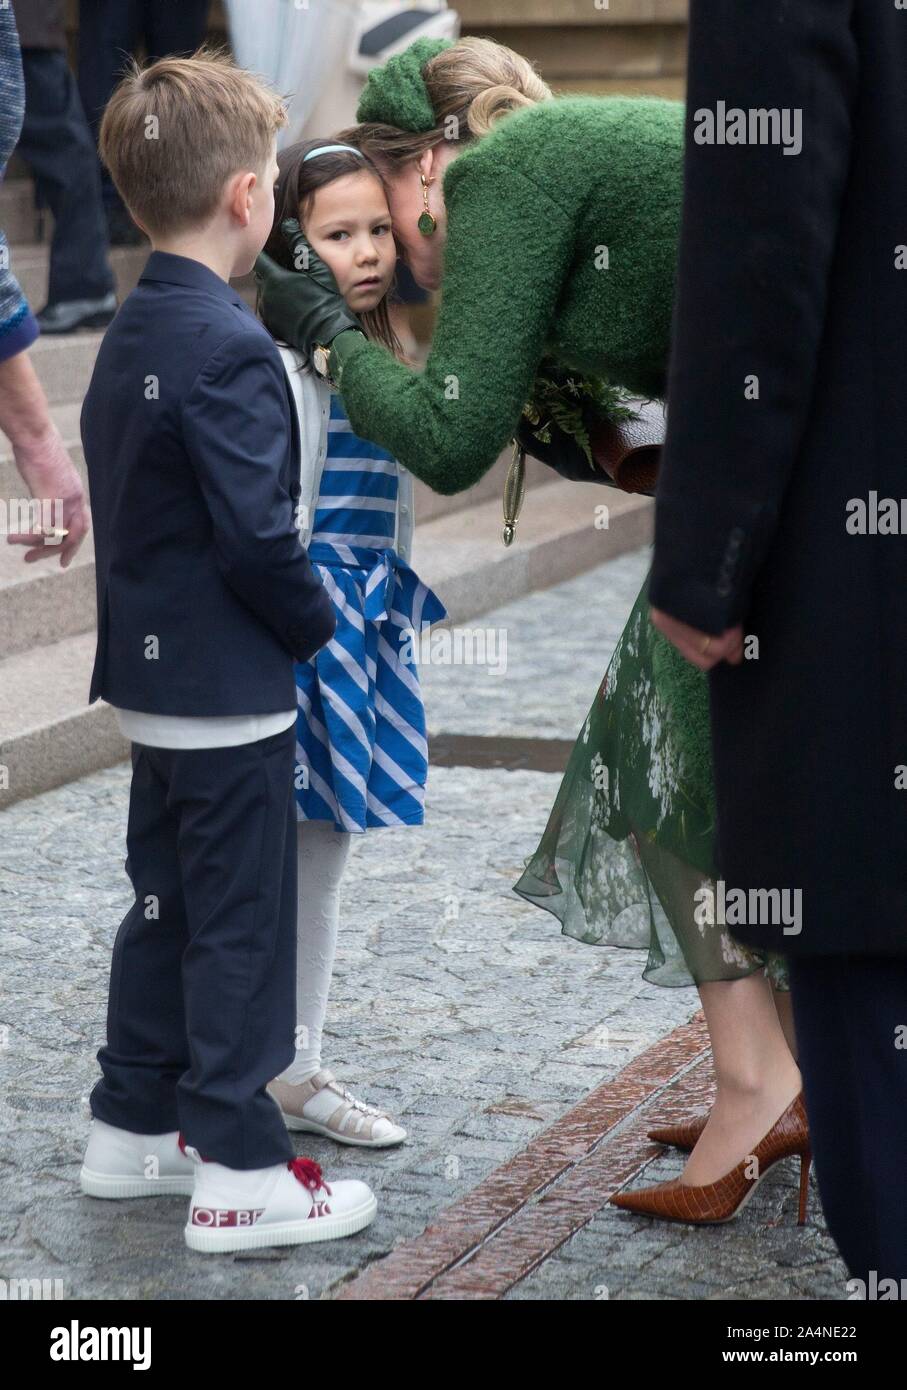 Luxembourg, Luxembourg. 15th Oct, 2019. Queen Mathilde of Belgium visits Chemin de la Corniche(most beautiful balcony of Europe), walked from the palais Grand-Ducal to the HotelnDe Ville in Luxembourg, on October 15, 2019, at the 1st of a 3 days Statevisit from Belgium to Luxembourg Credit: Albert Ph van der Werf/ Netherlands OUT/Point de Vue OUT |/dpa/Alamy Live News Stock Photo